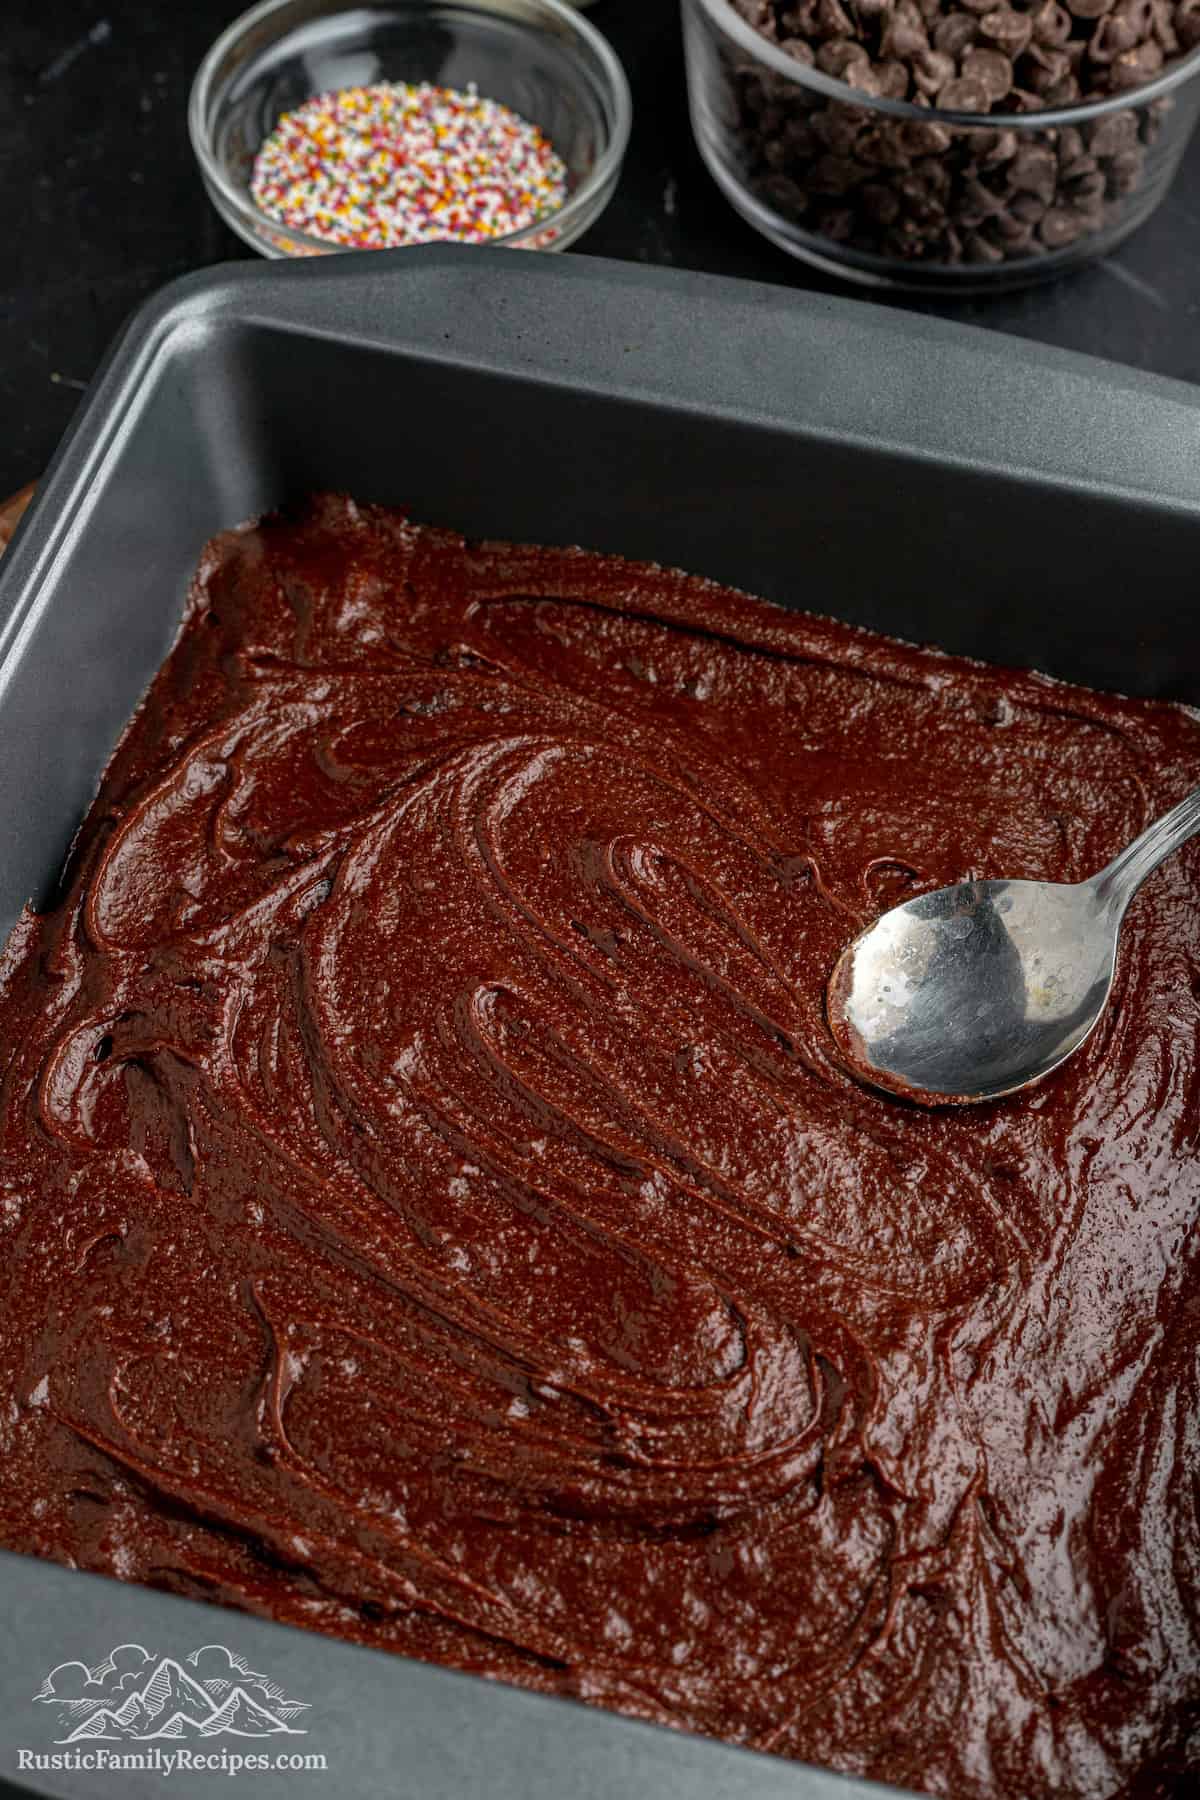 An 8x8-inch baking pan full of brownie batter